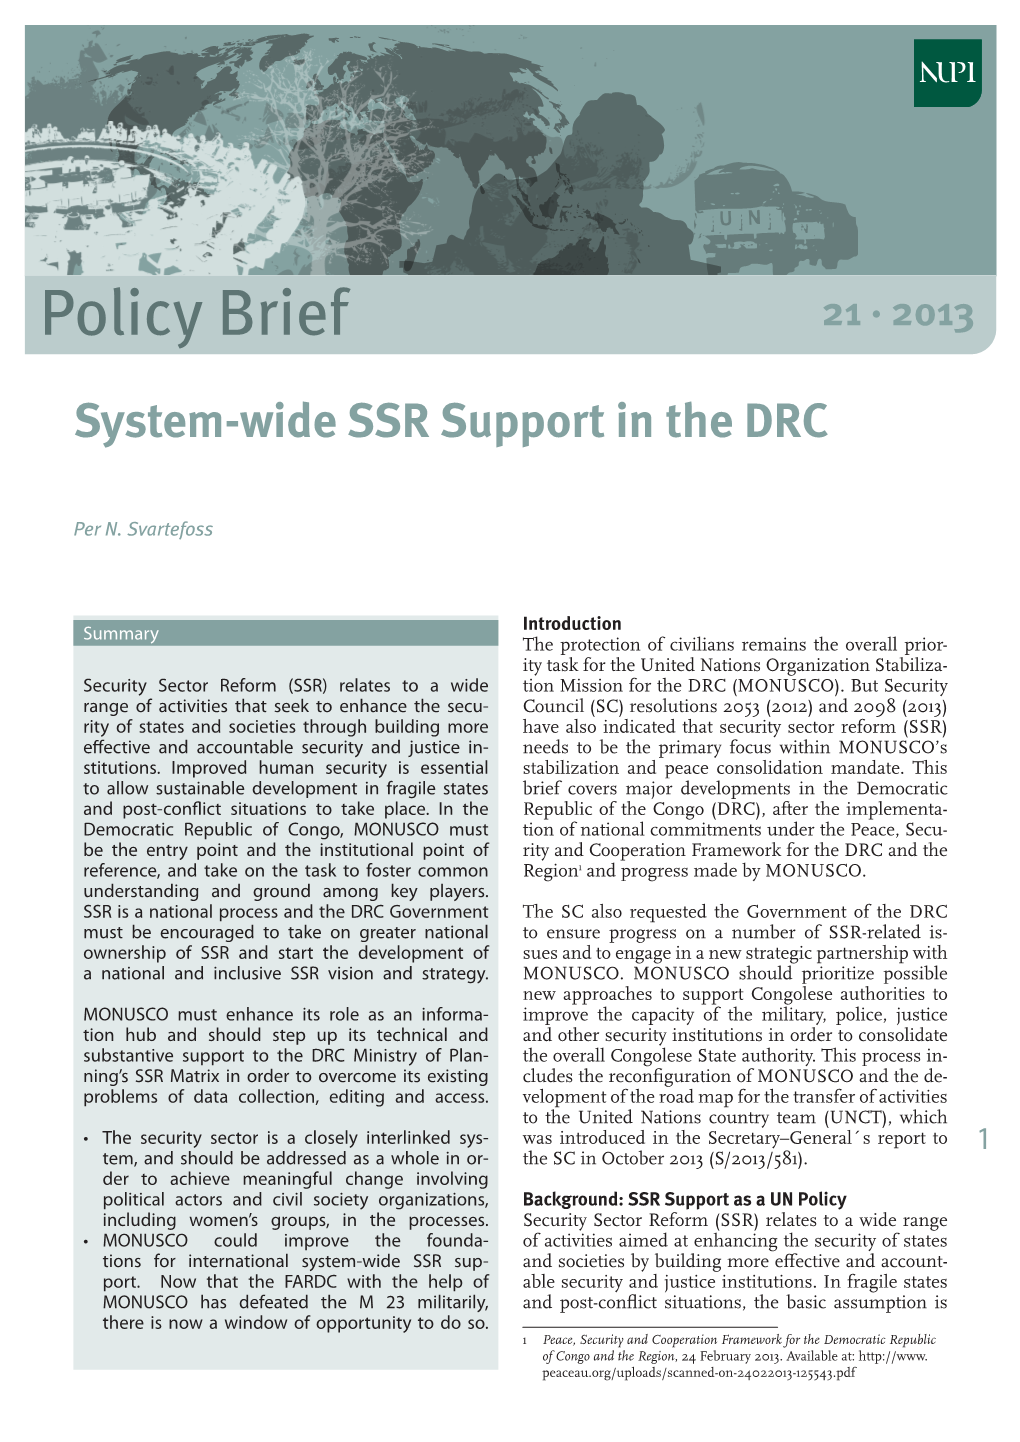 System-Wide SSR Support in the DRC